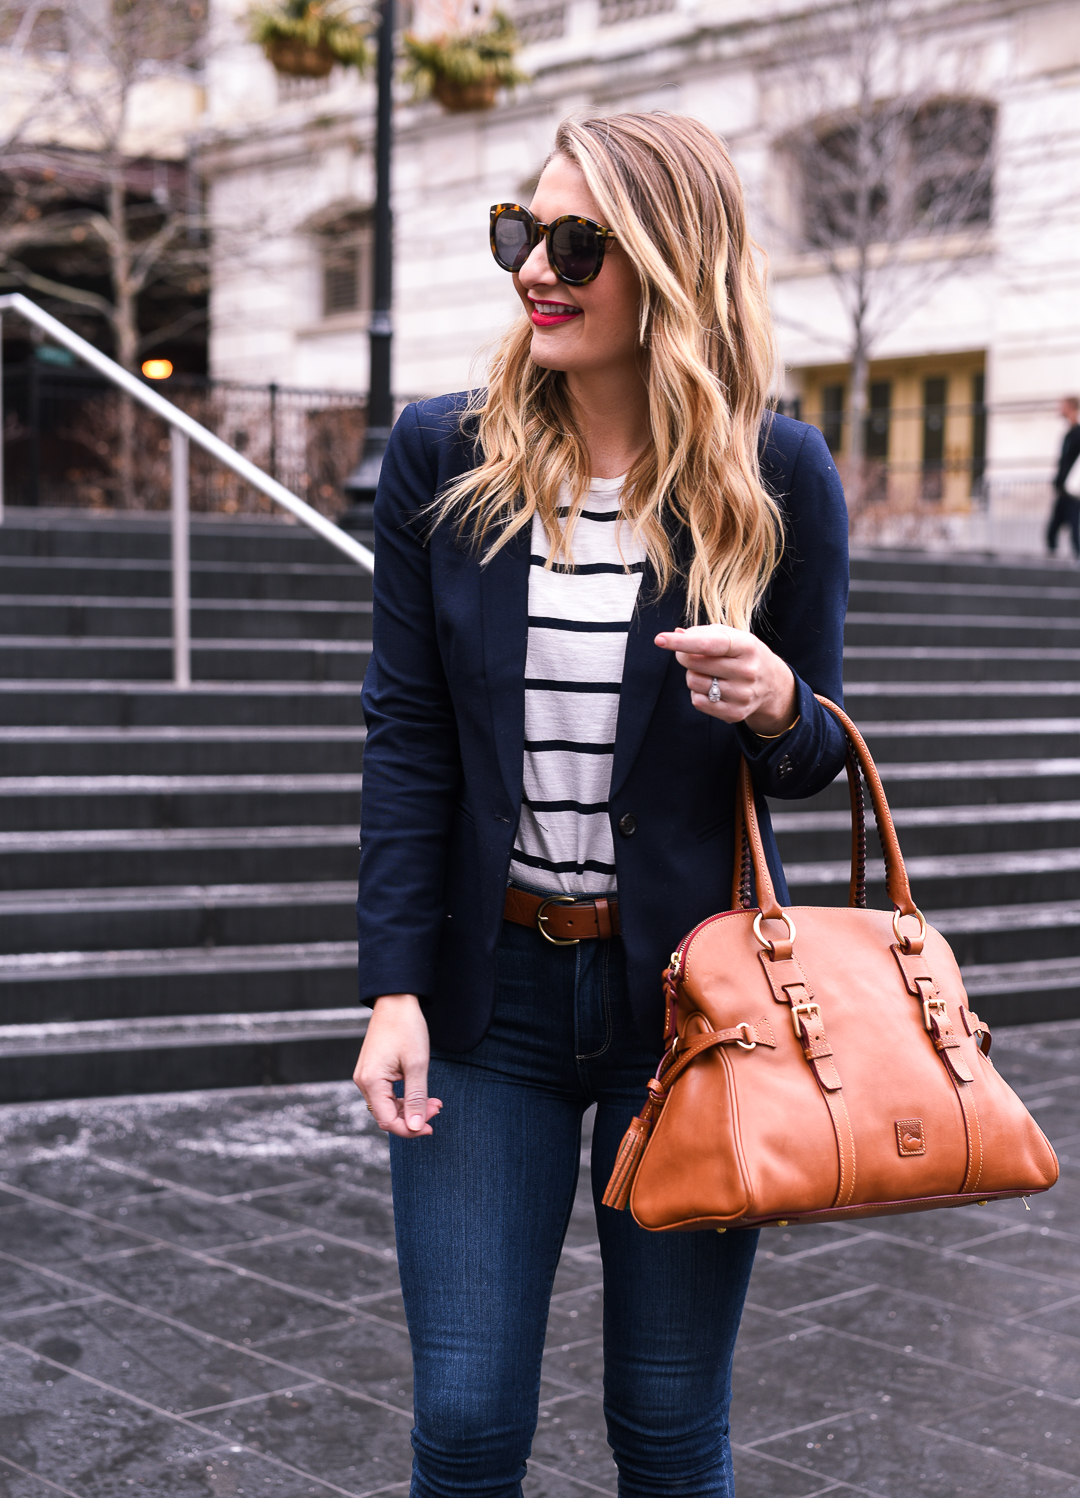 how to wear navy stripes - work life balance tips by popular Chicago lifestyle blogger Visions of Vogue